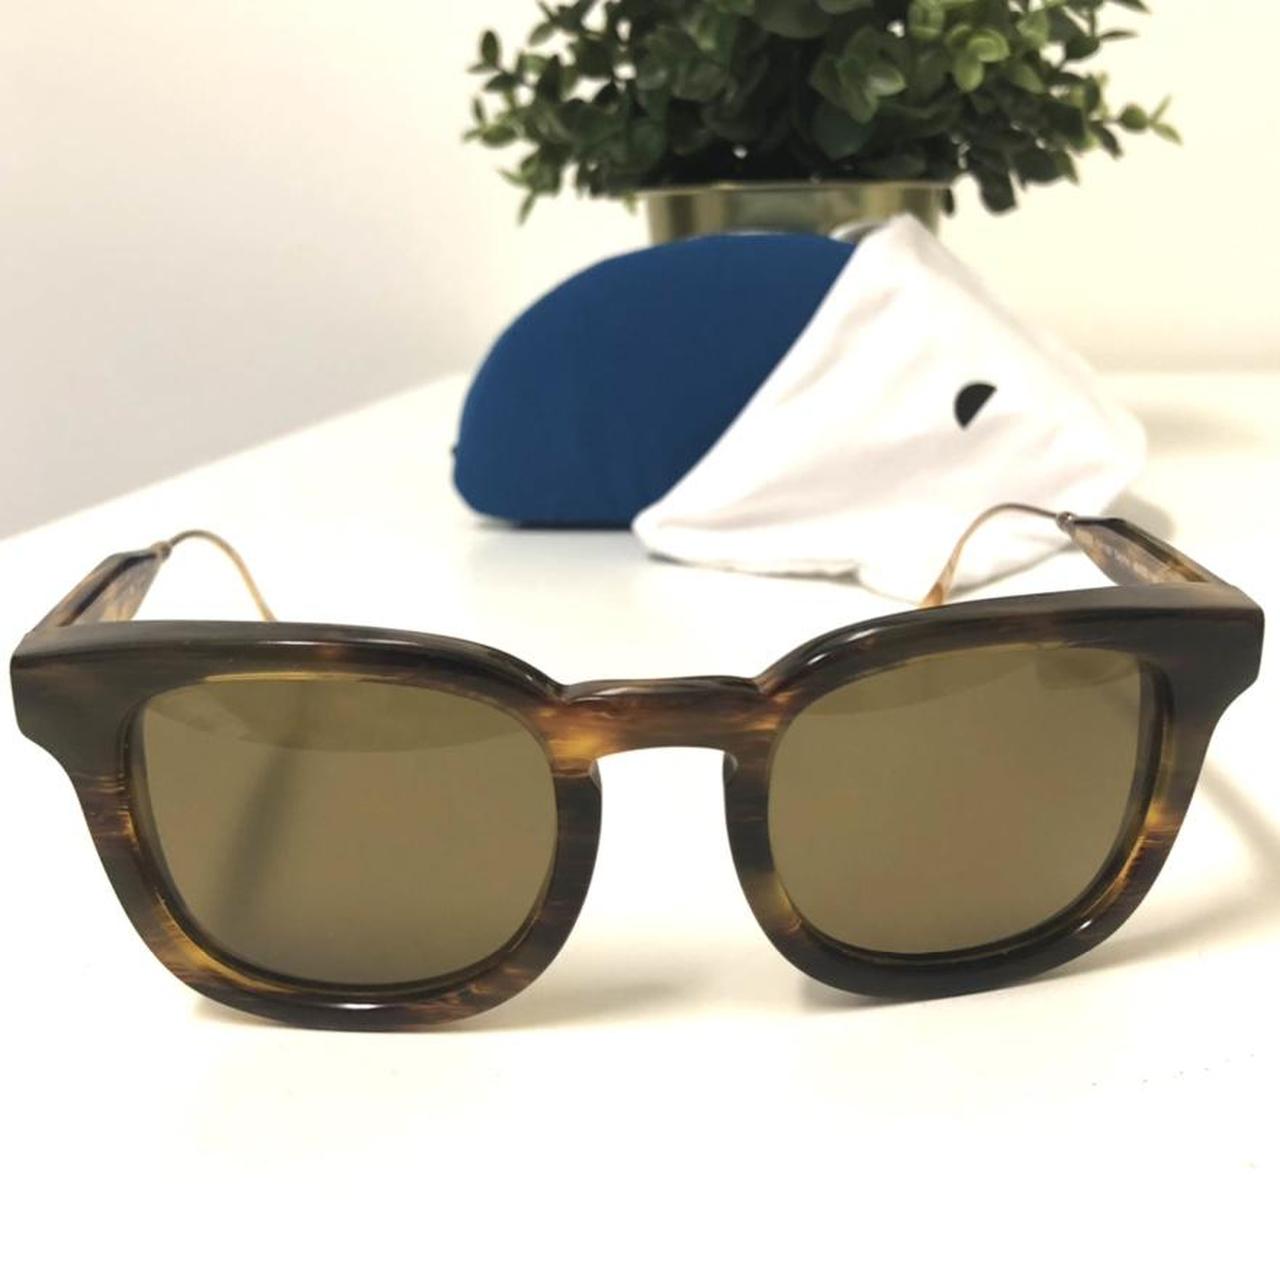 Oliver Peoples Men's Gold and Brown Sunglasses (2)